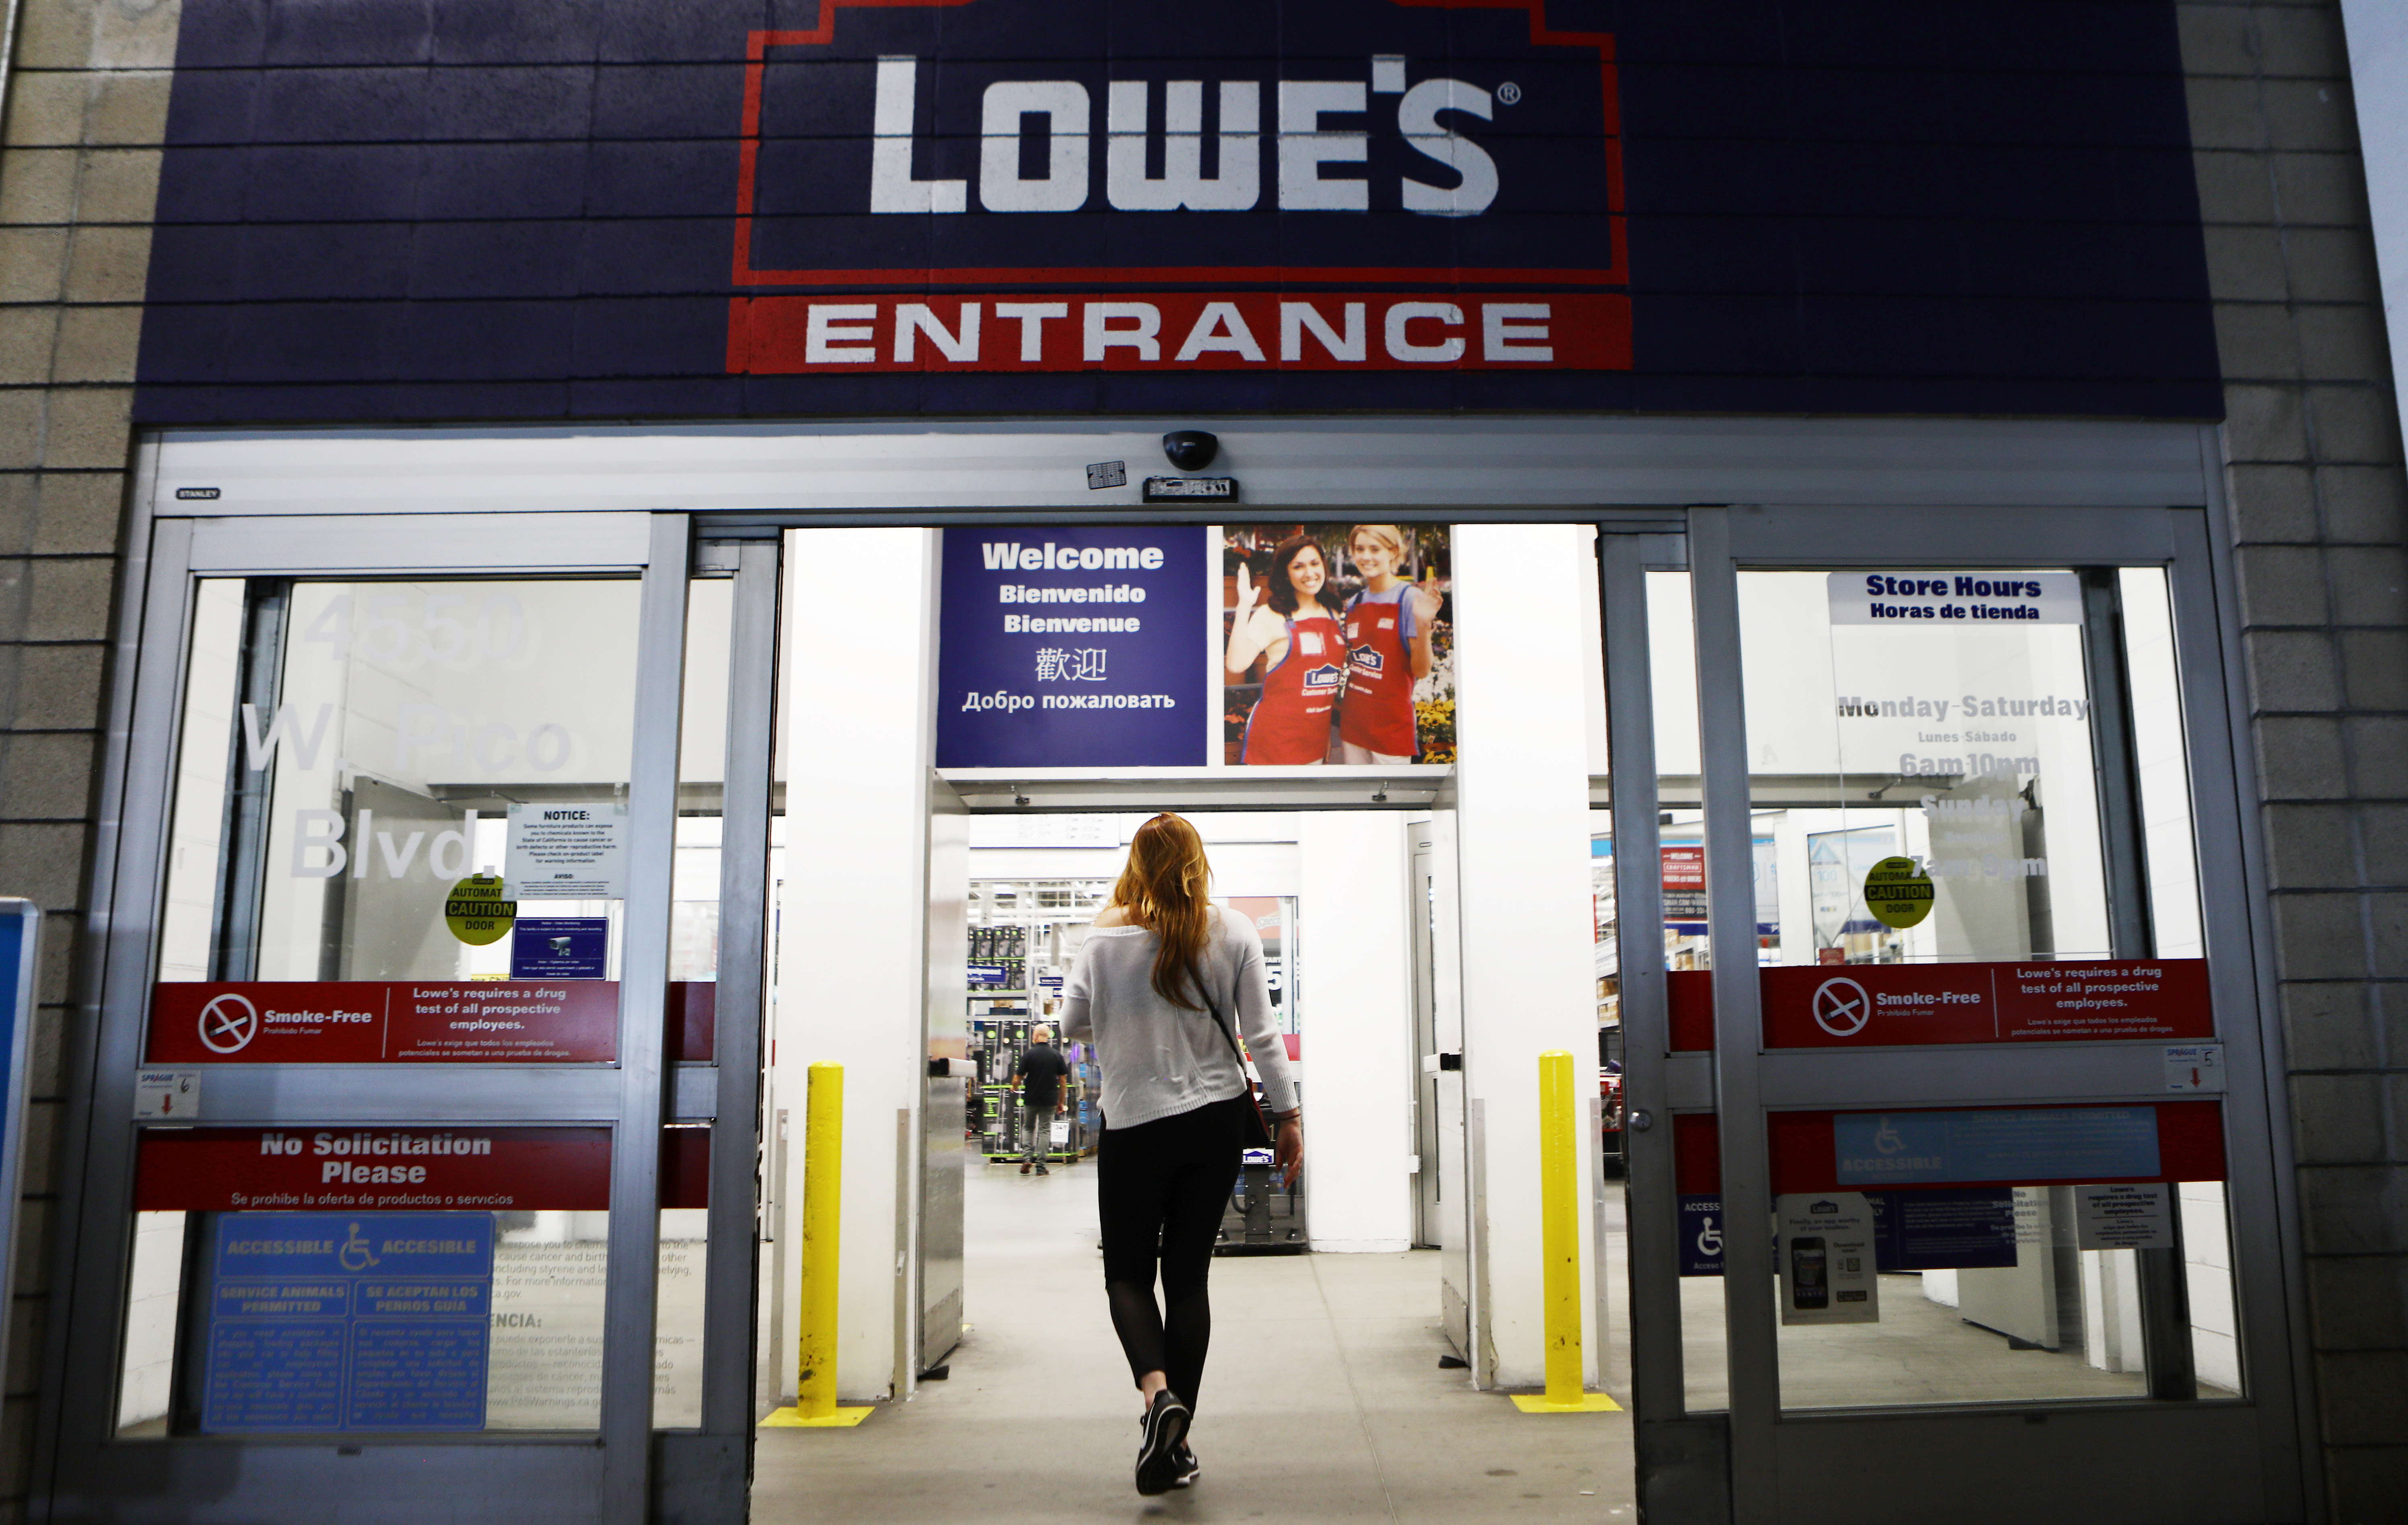 Are Home Depot & Lowe’s Open on New Year’s Eve & Day 20202021?